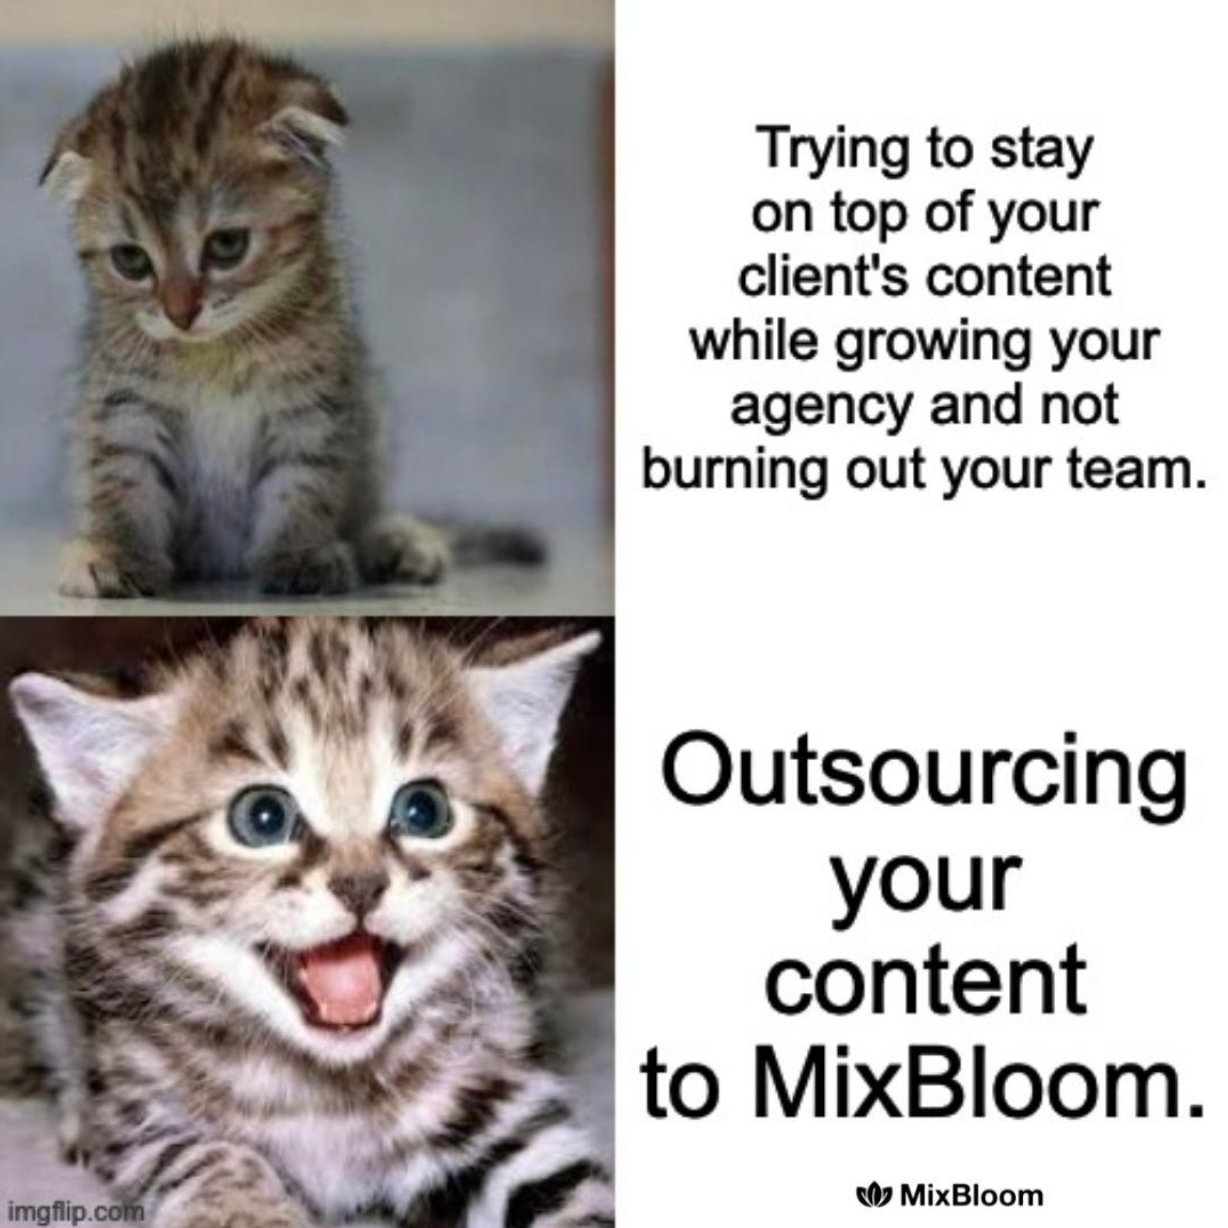 Trying to stay on top of your client's content while growing your agency and not burning your team... versus outsourcing your content to MixBloom